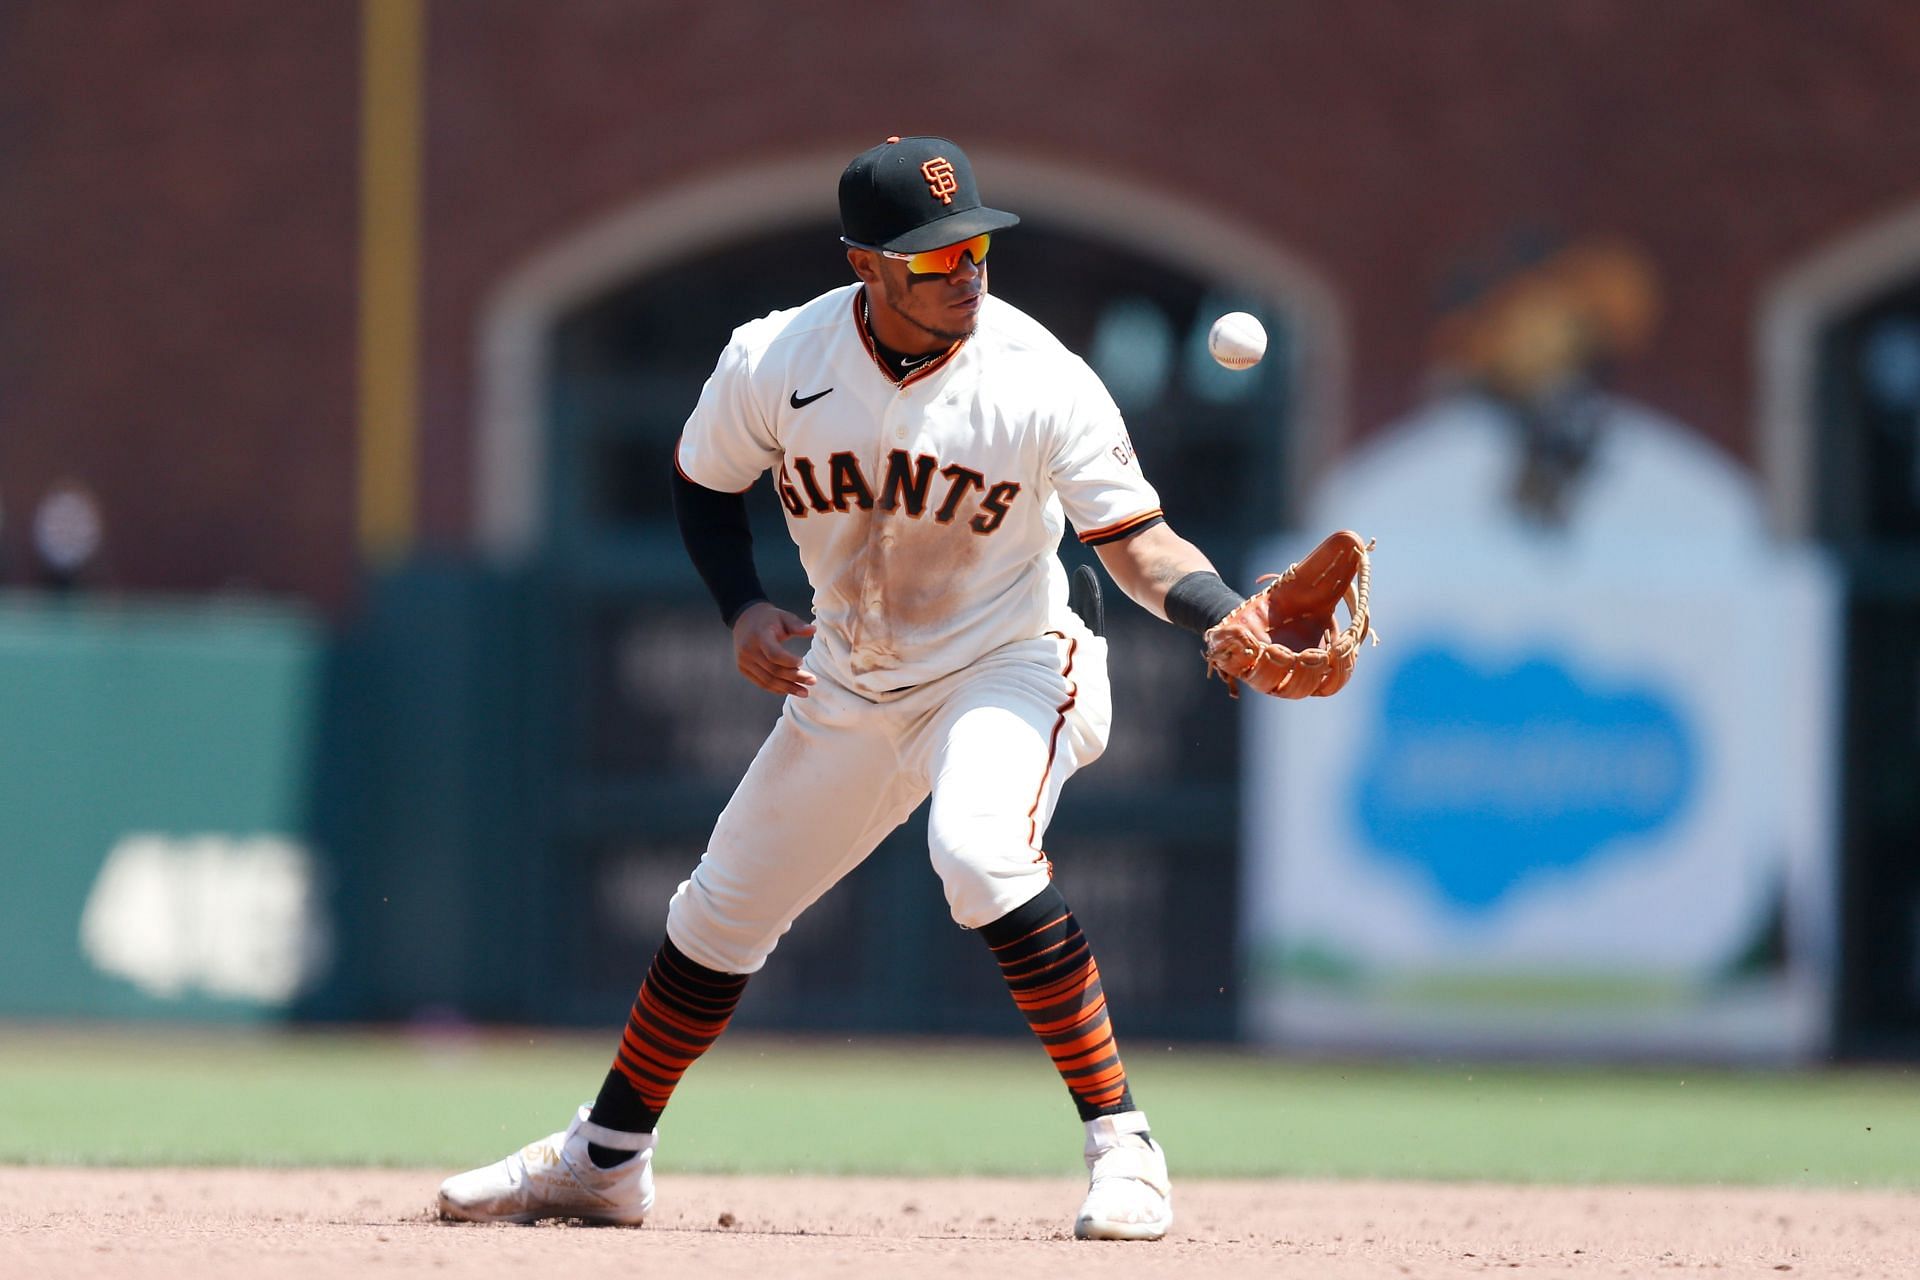 San Francisco Giants infielder Thairo Estrada committed two errors in the fourth inning against the Colorado Rockies.